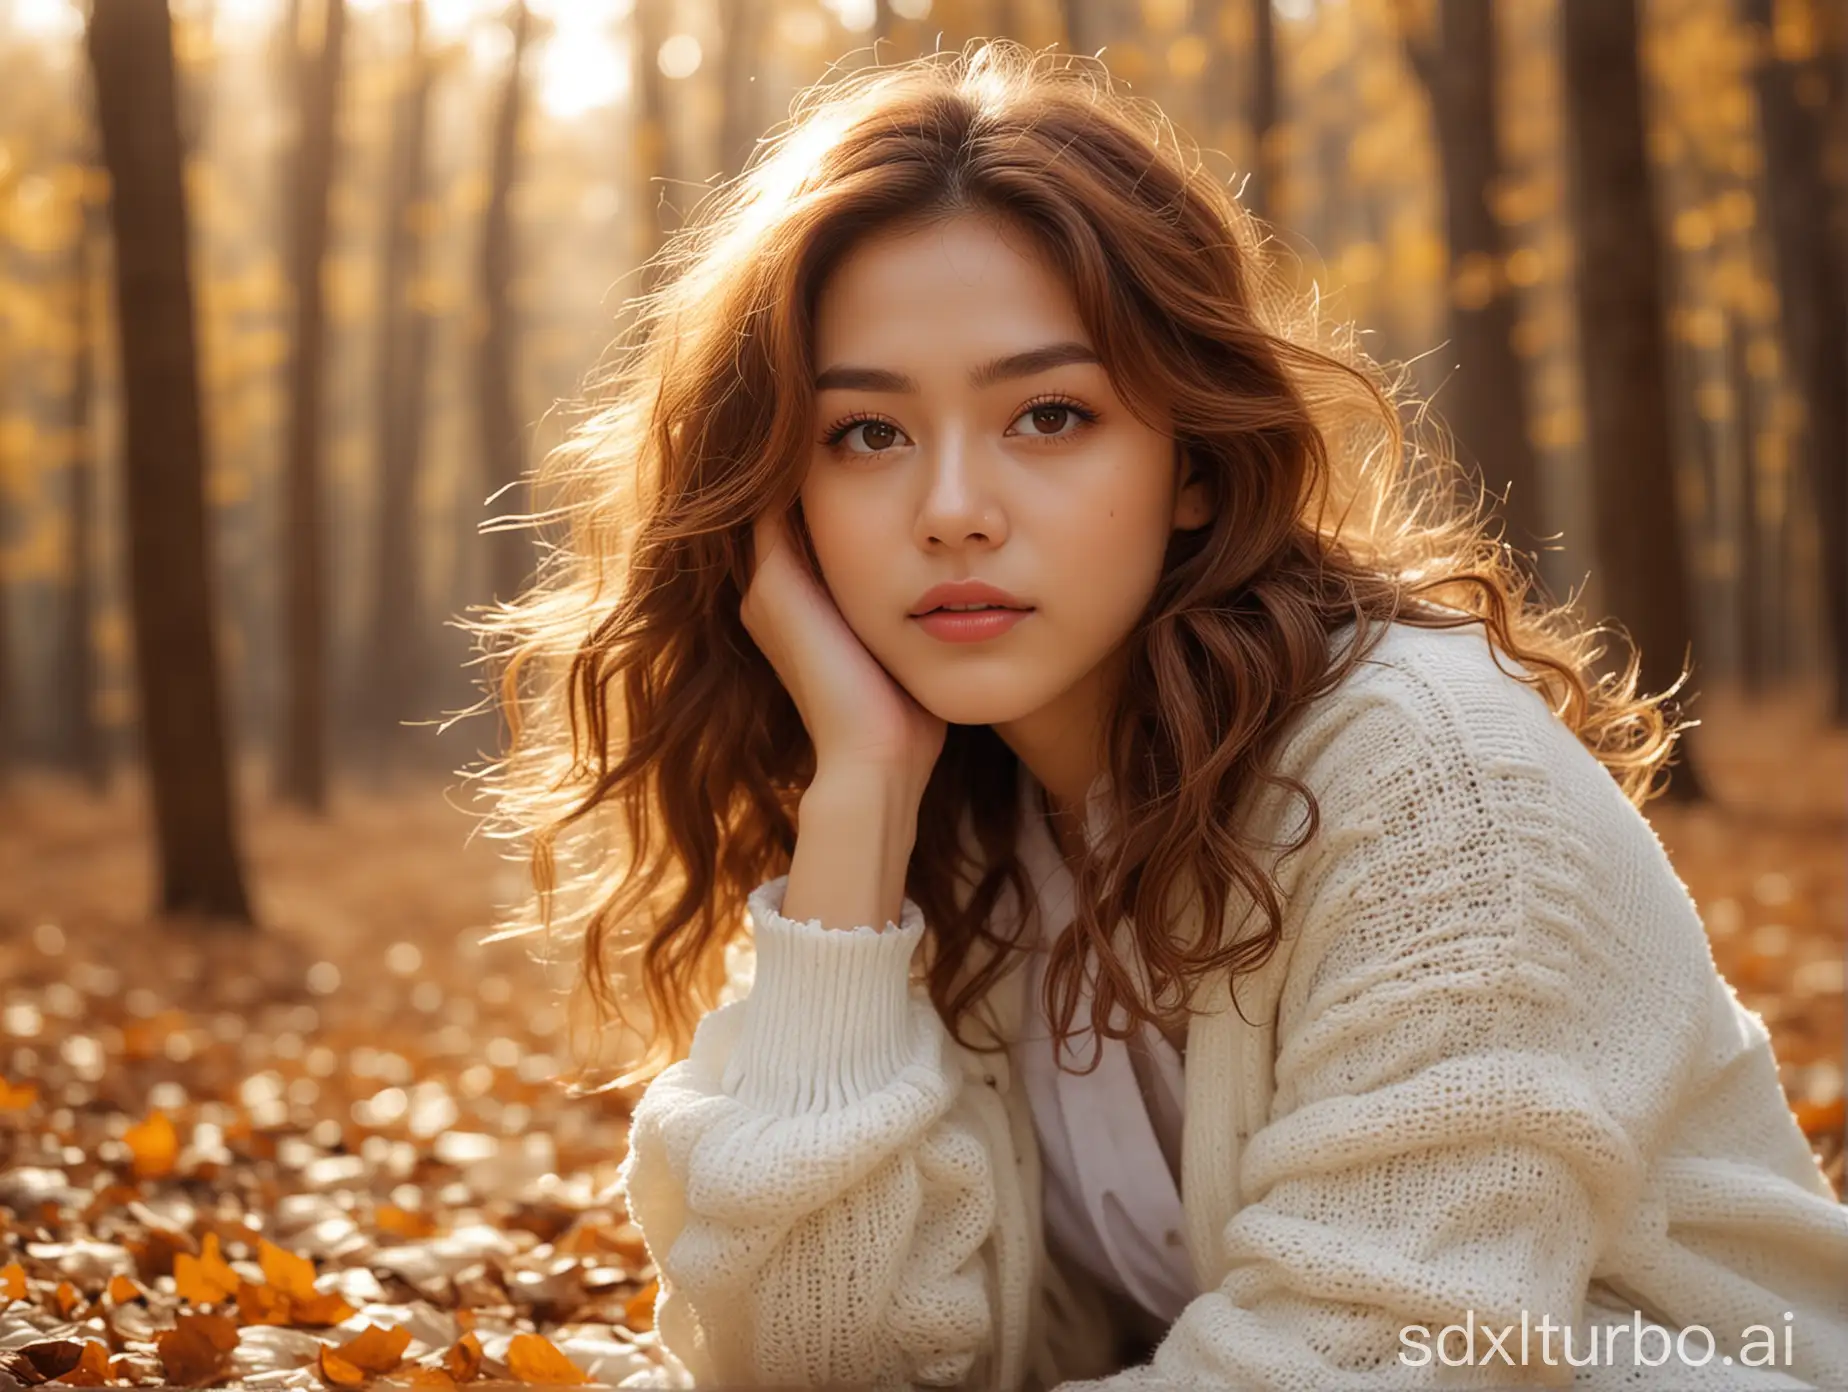 Squatting-Girl-in-White-Knitted-Cardigan-with-Brown-Curly-Hair-in-Golden-Woods